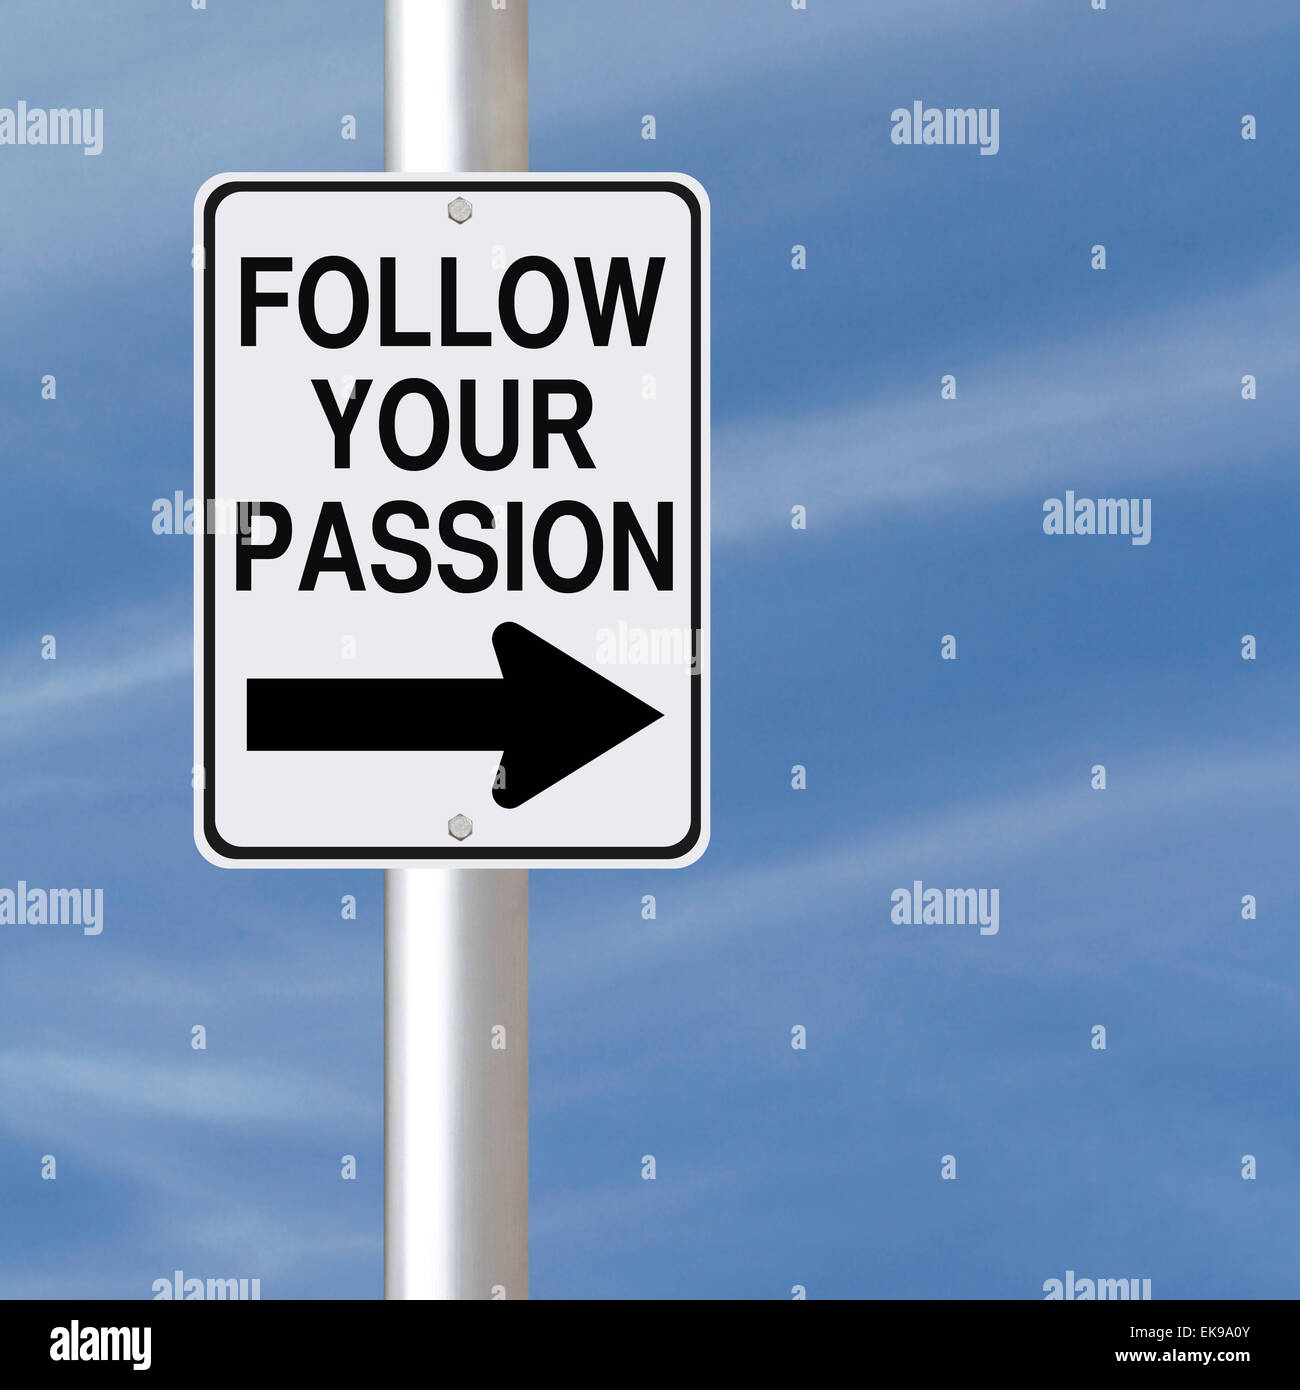 Follow Your Passion Stock Photo